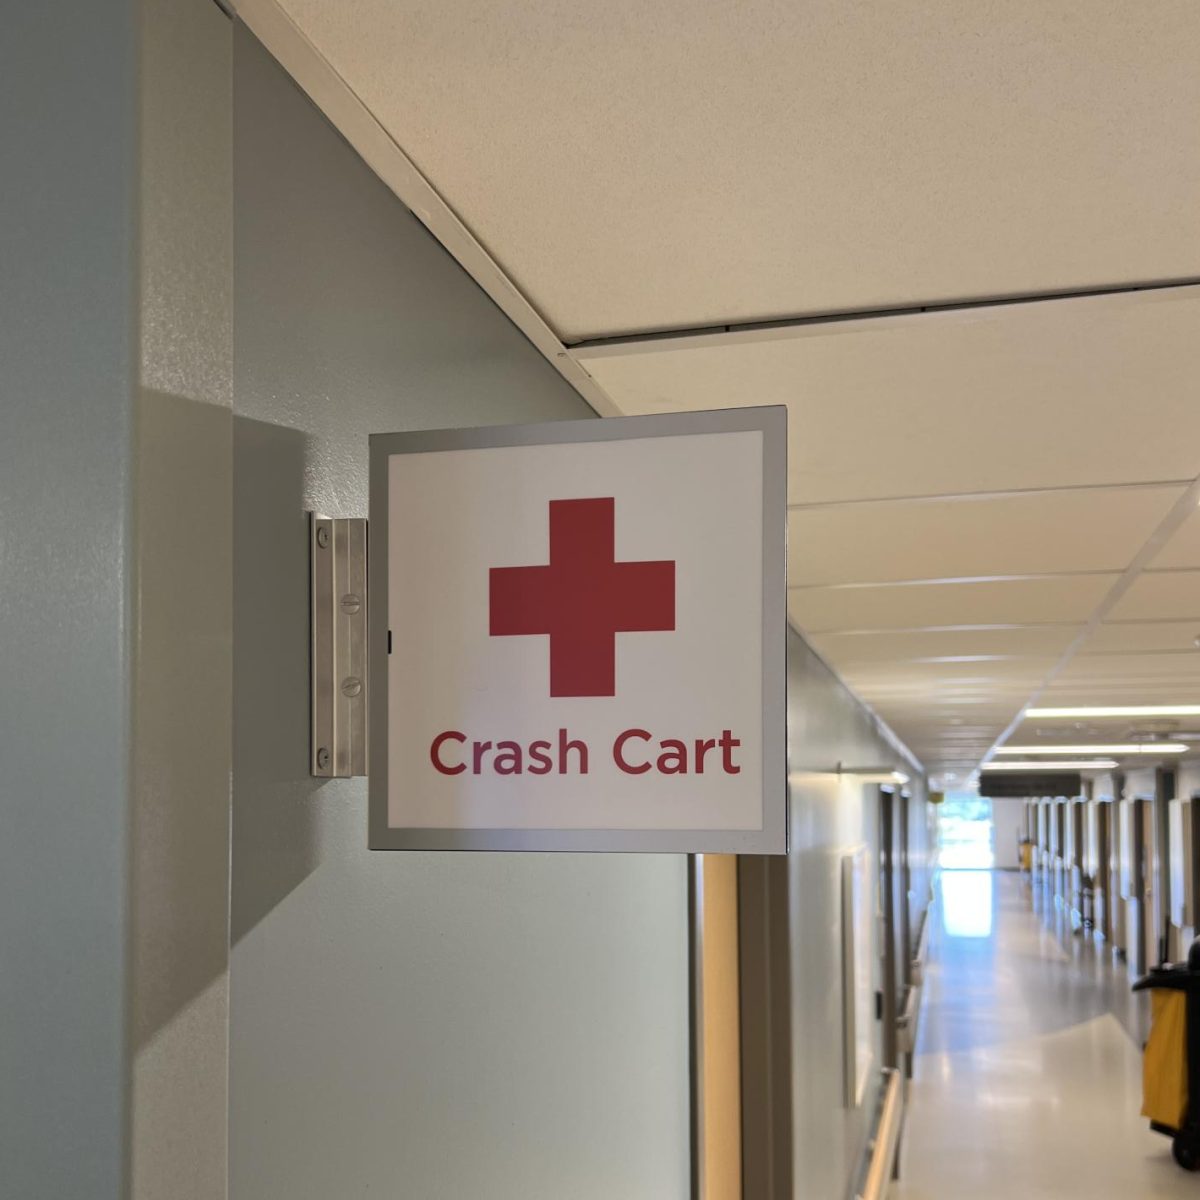 Tonya Wallers department replenishes many emergency kits including the crash carts found around the hospitals. 